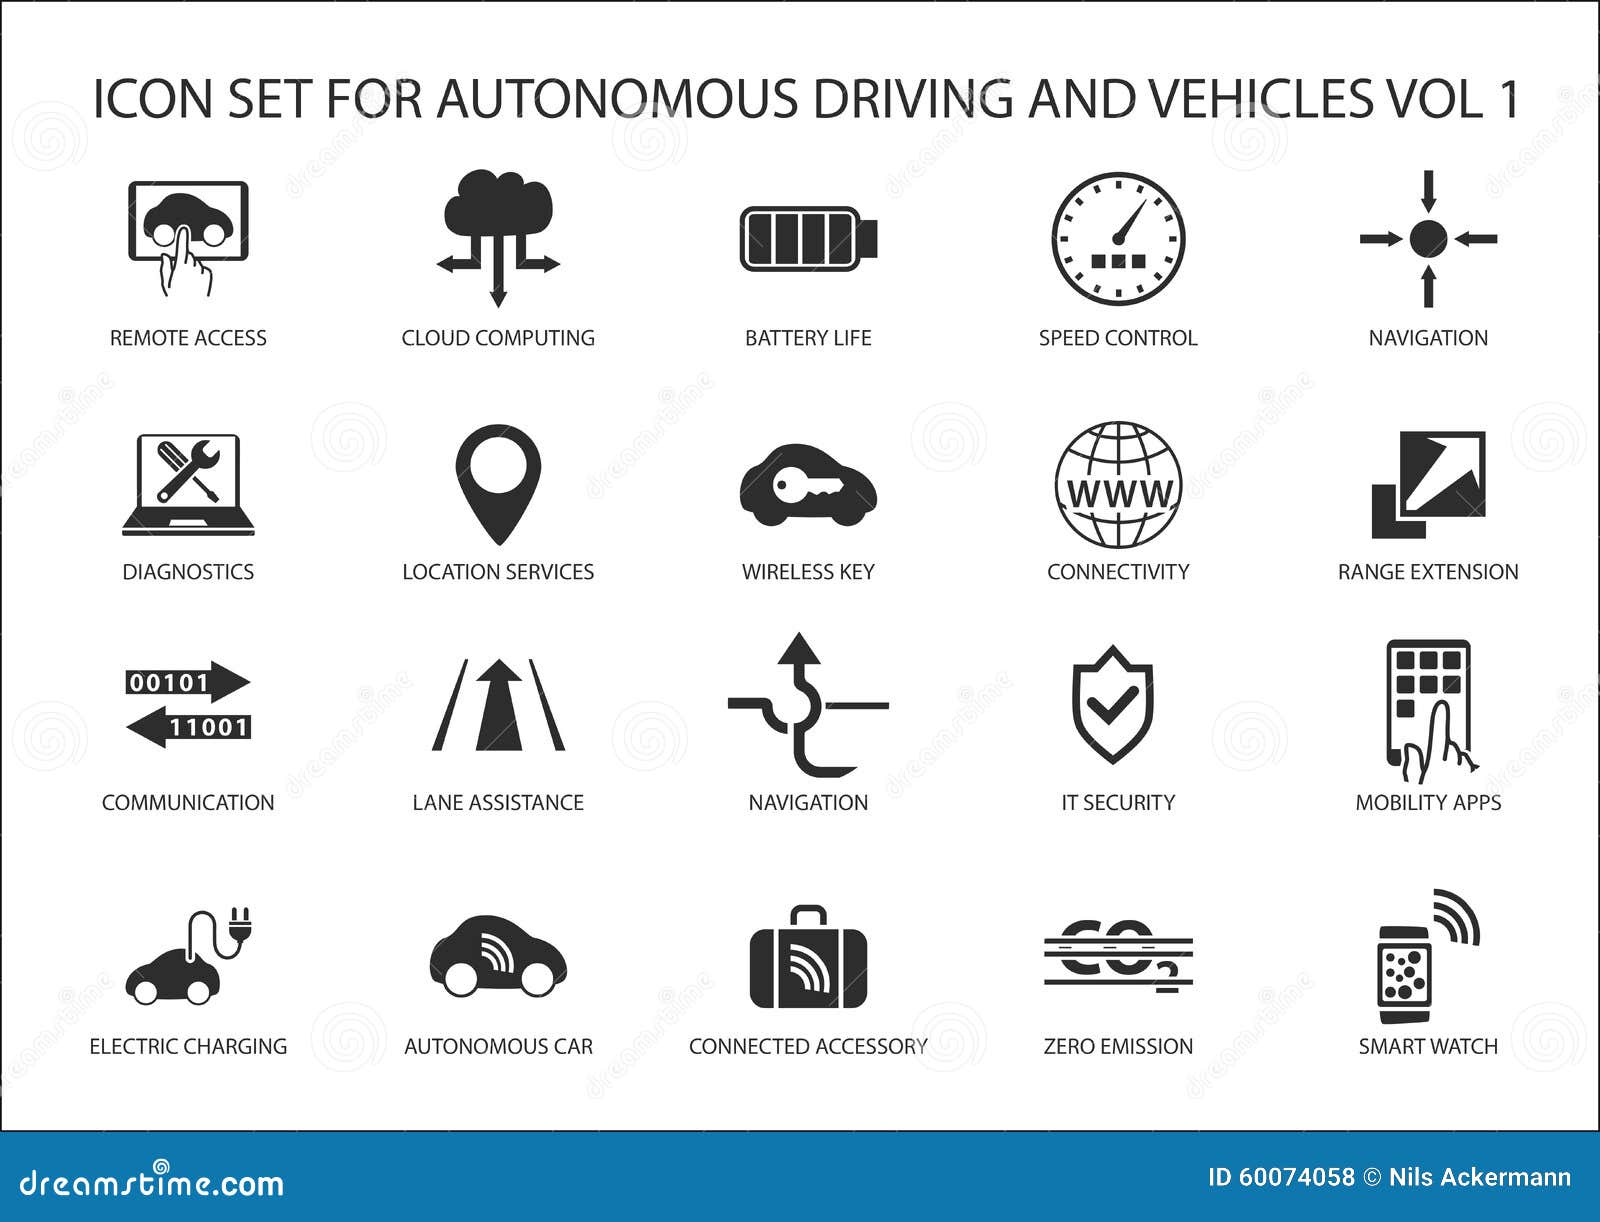 self driving and autonomous vehicles icons.